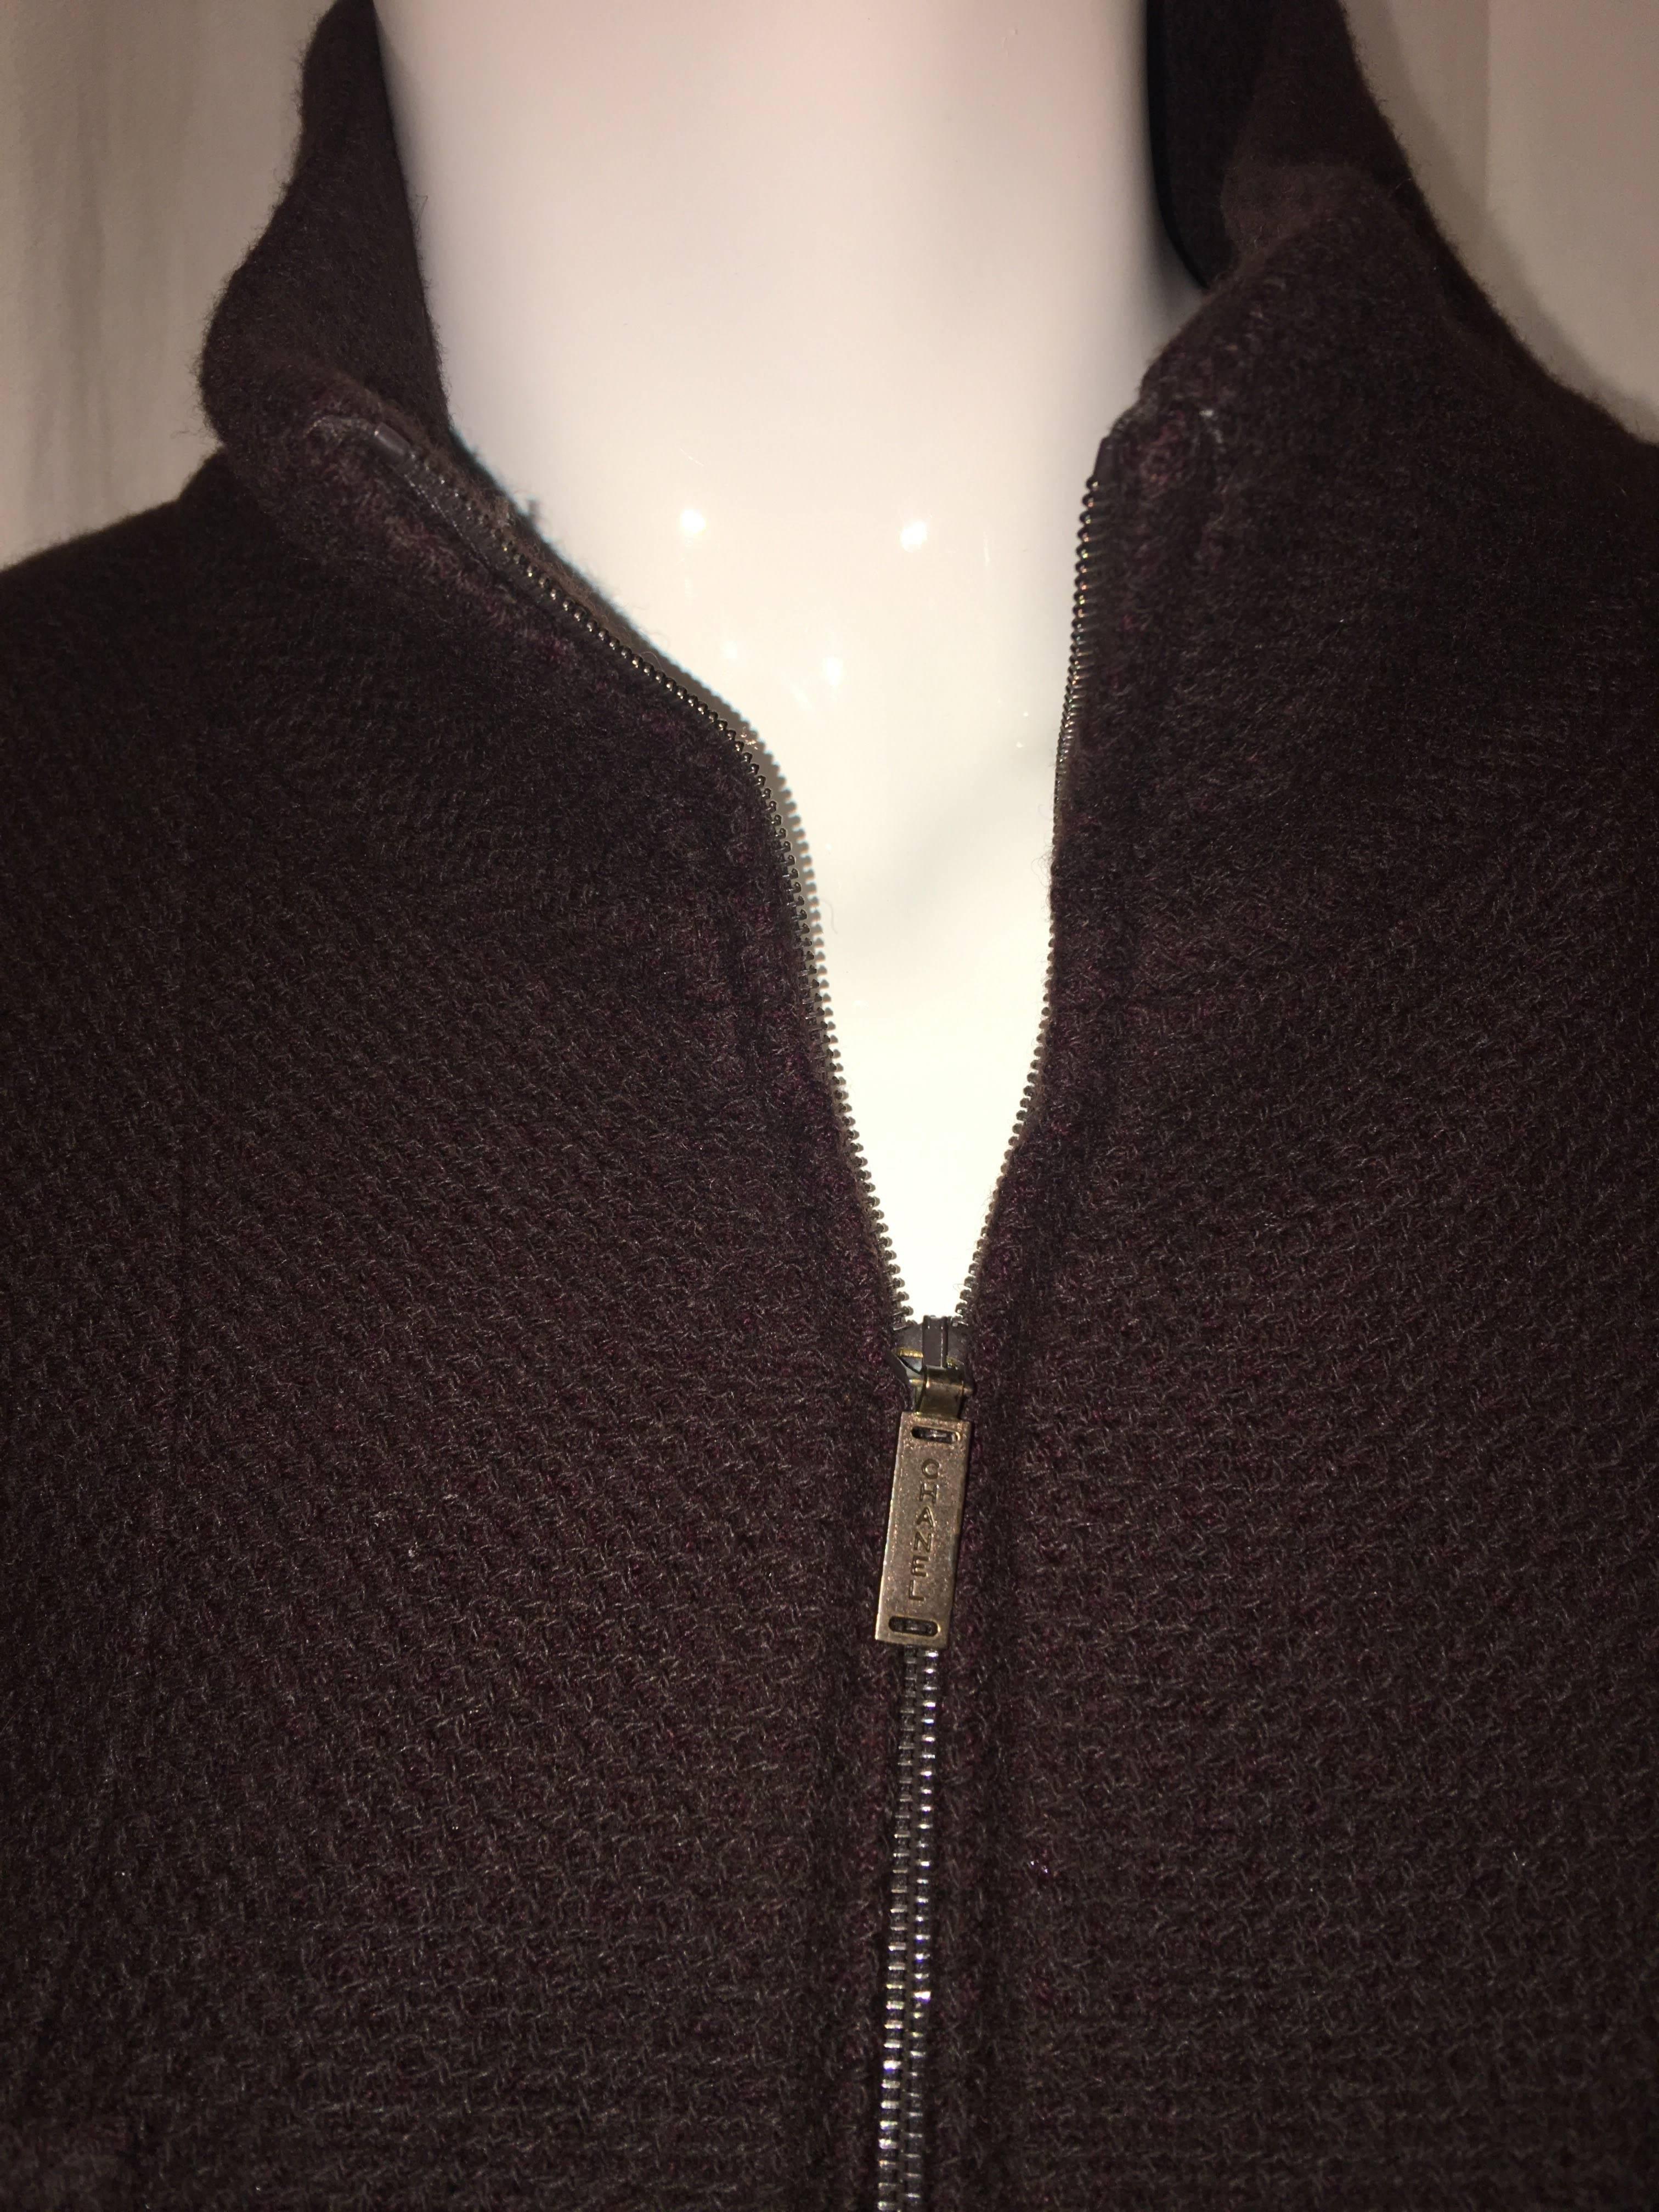 Chanel Cashmere Zip Sweater with 4-Pockets.